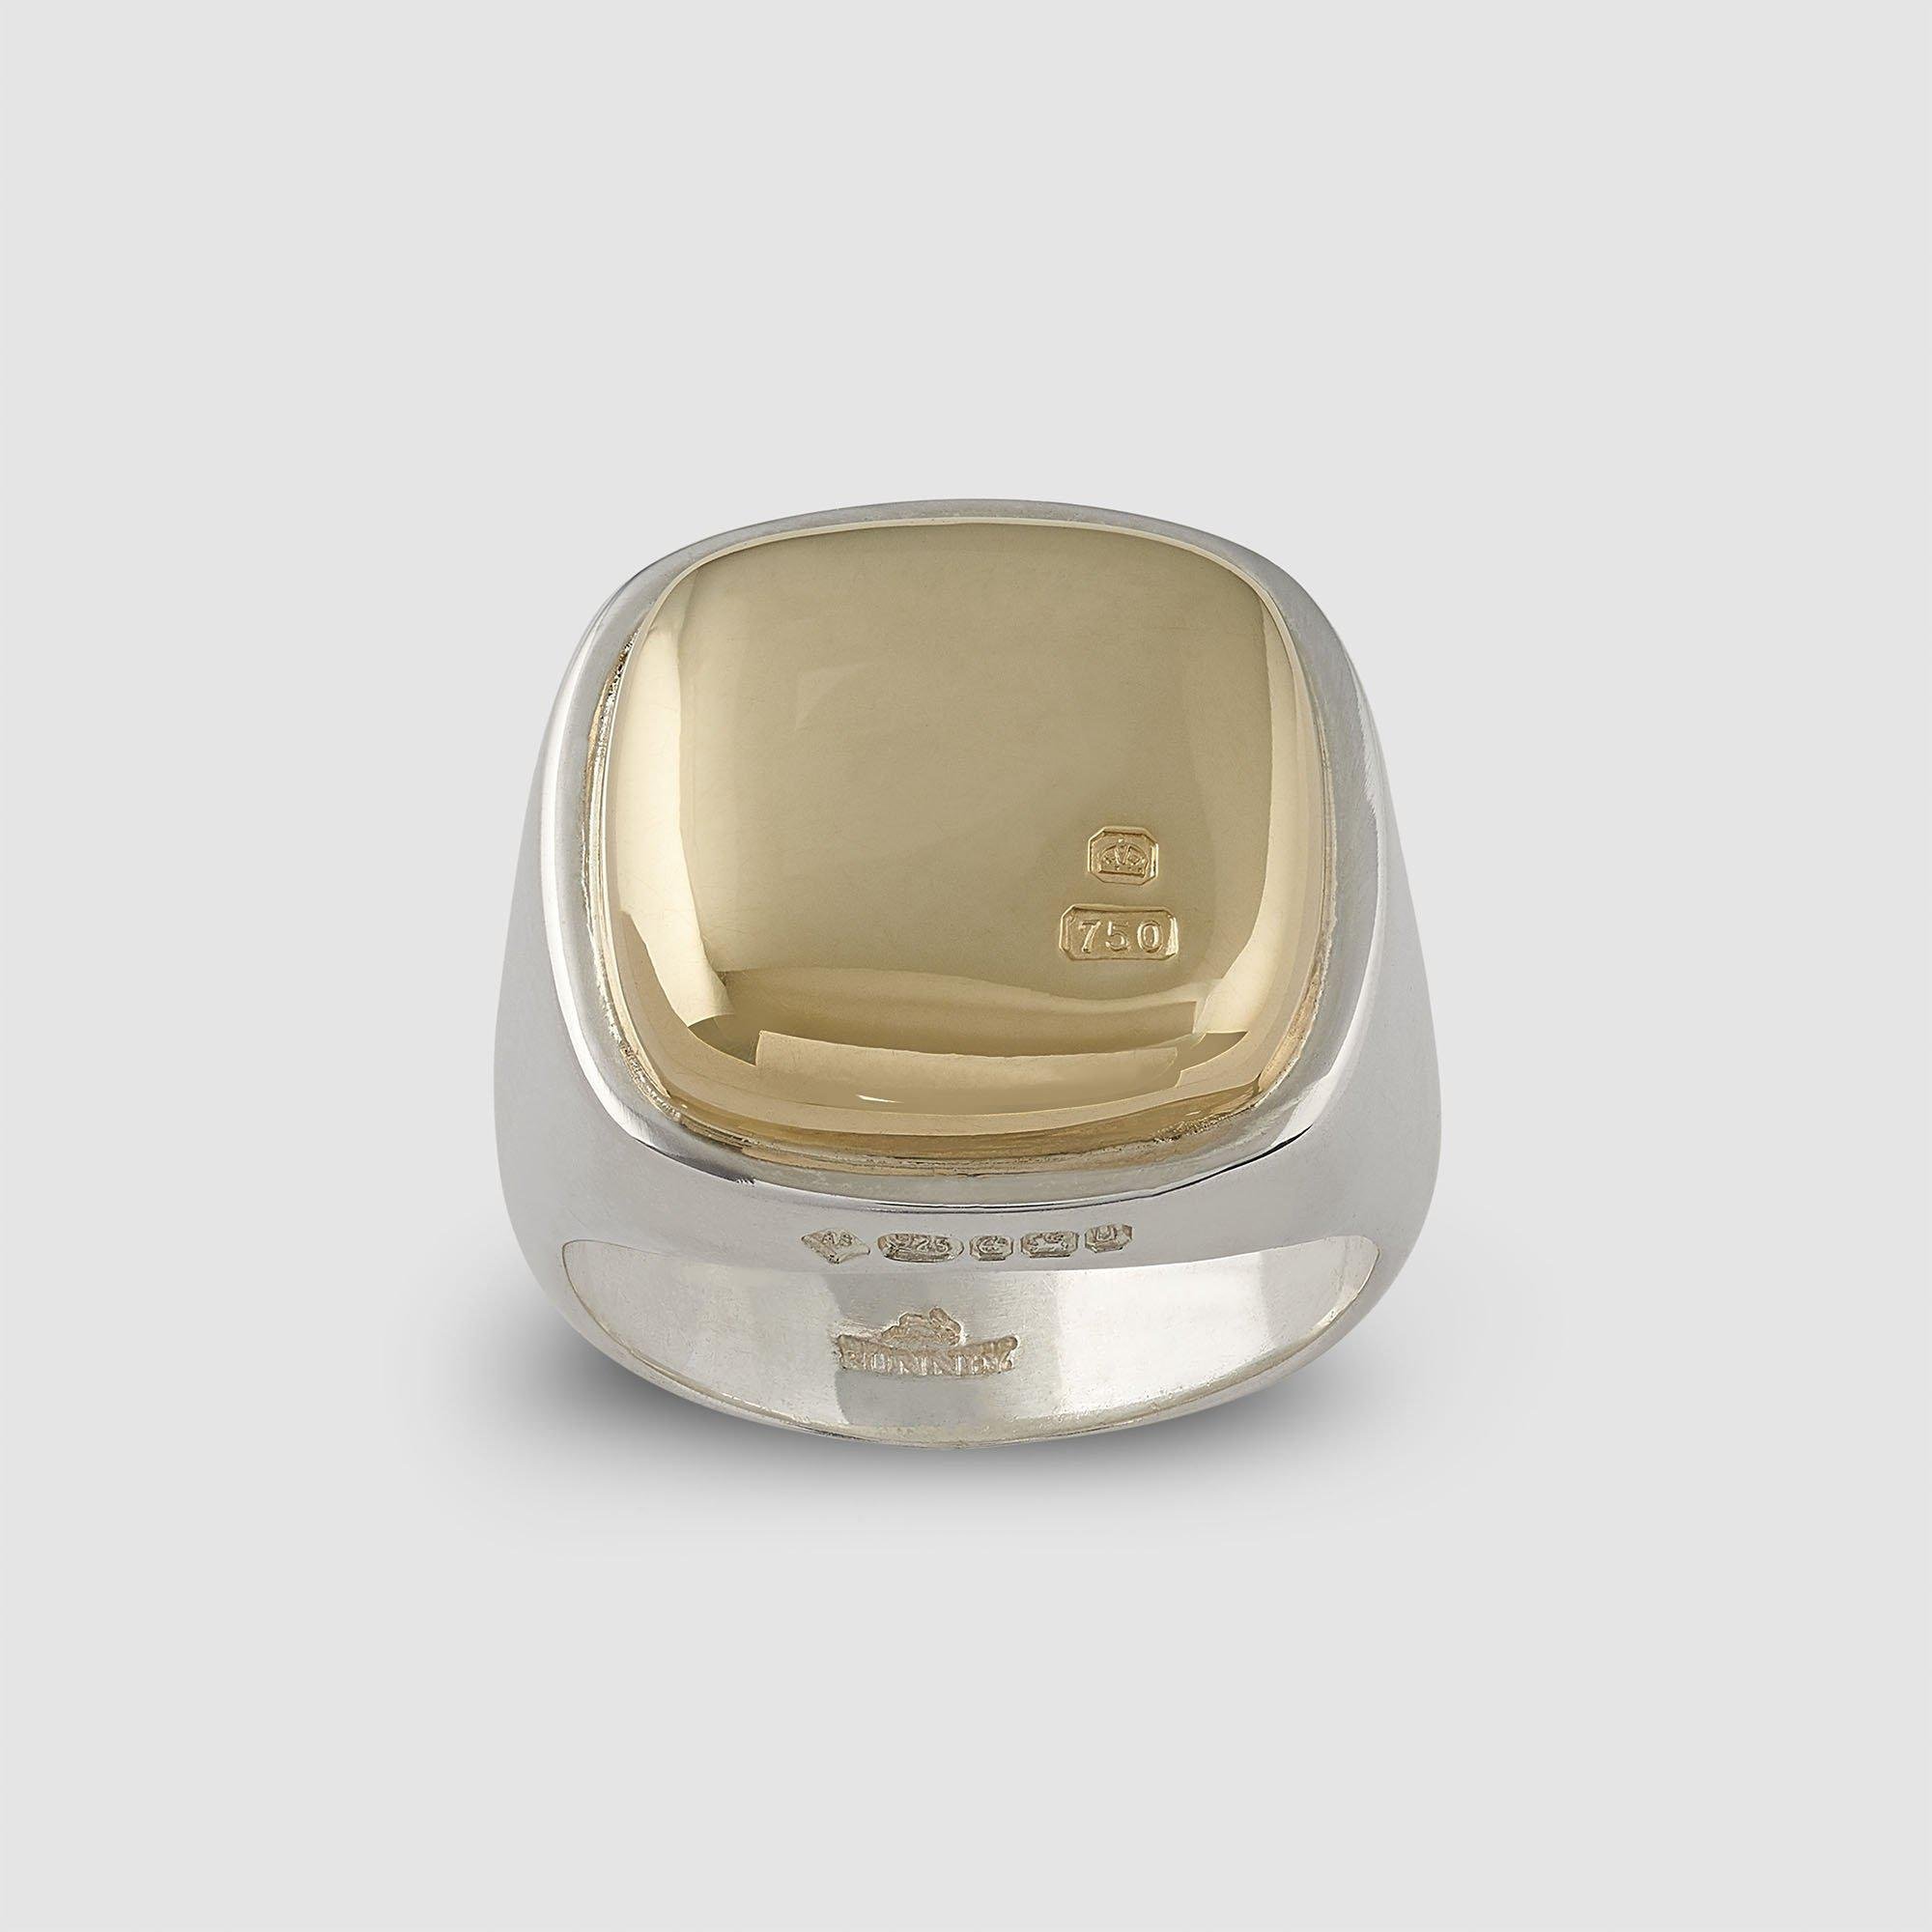 Bunney - Heavy Cushion Cabachon Signet Ring by BUNNEY